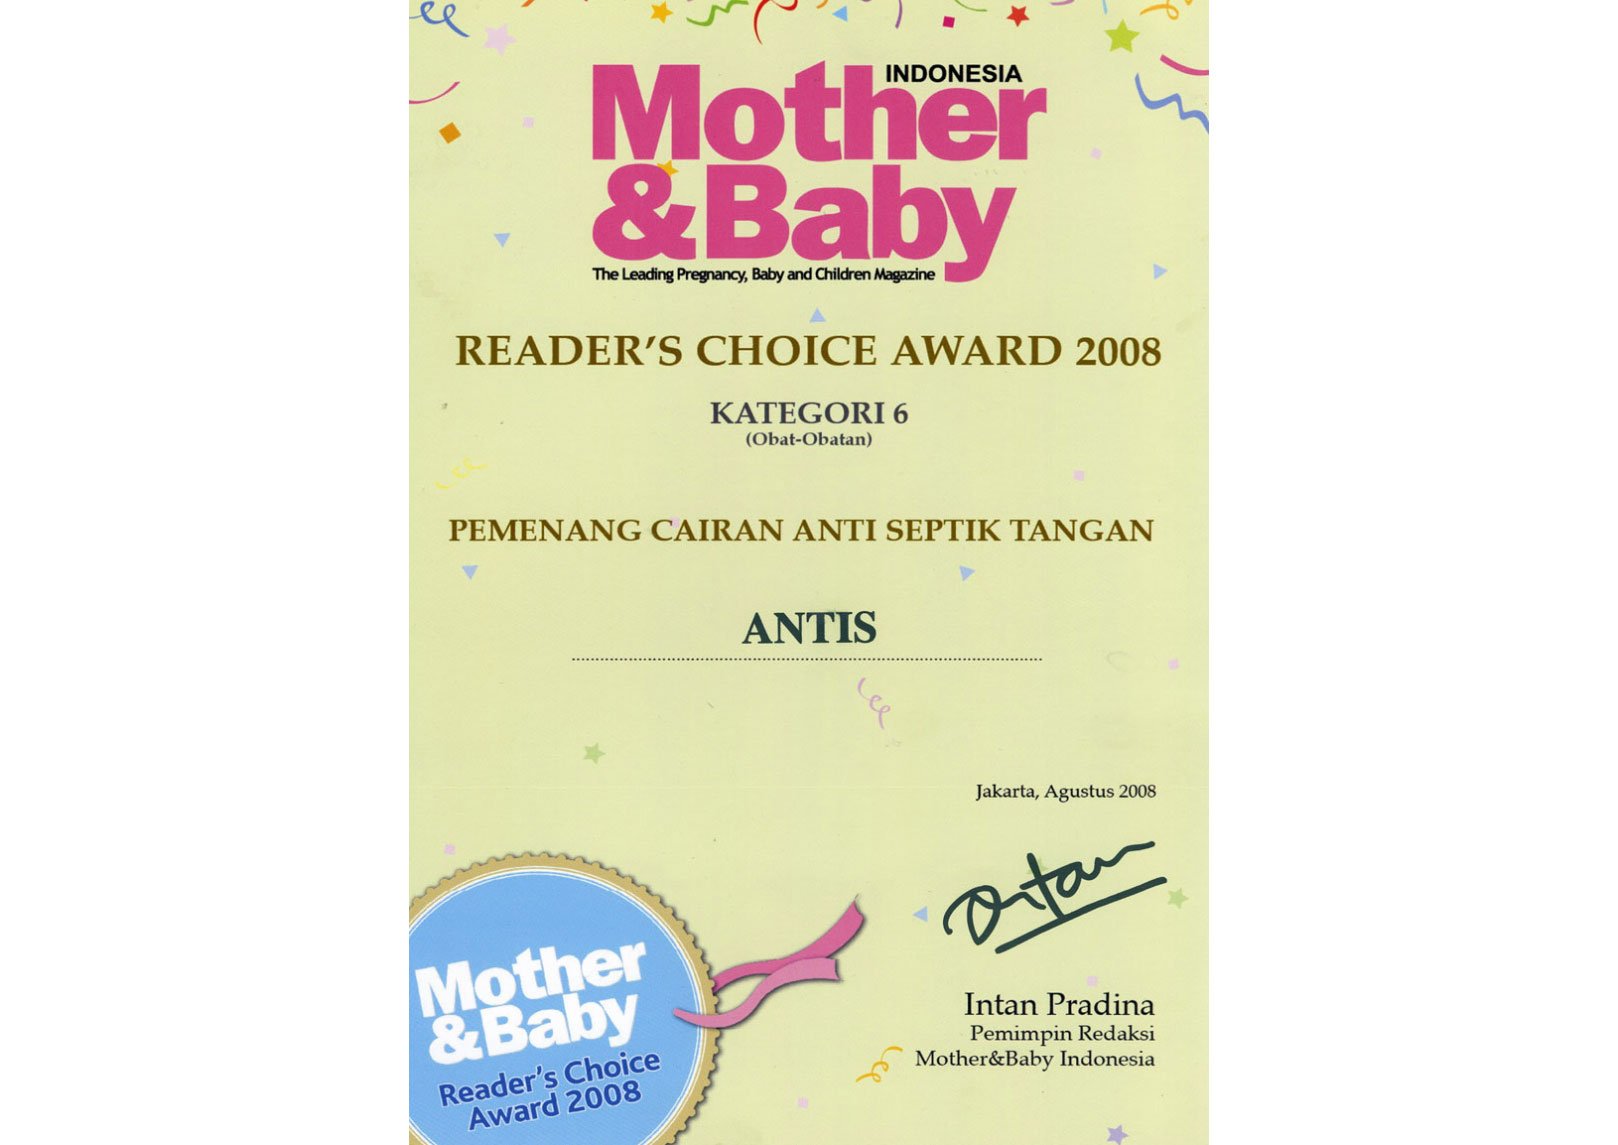 Mother & Baby Indonesia Reader's Choice Award 2008